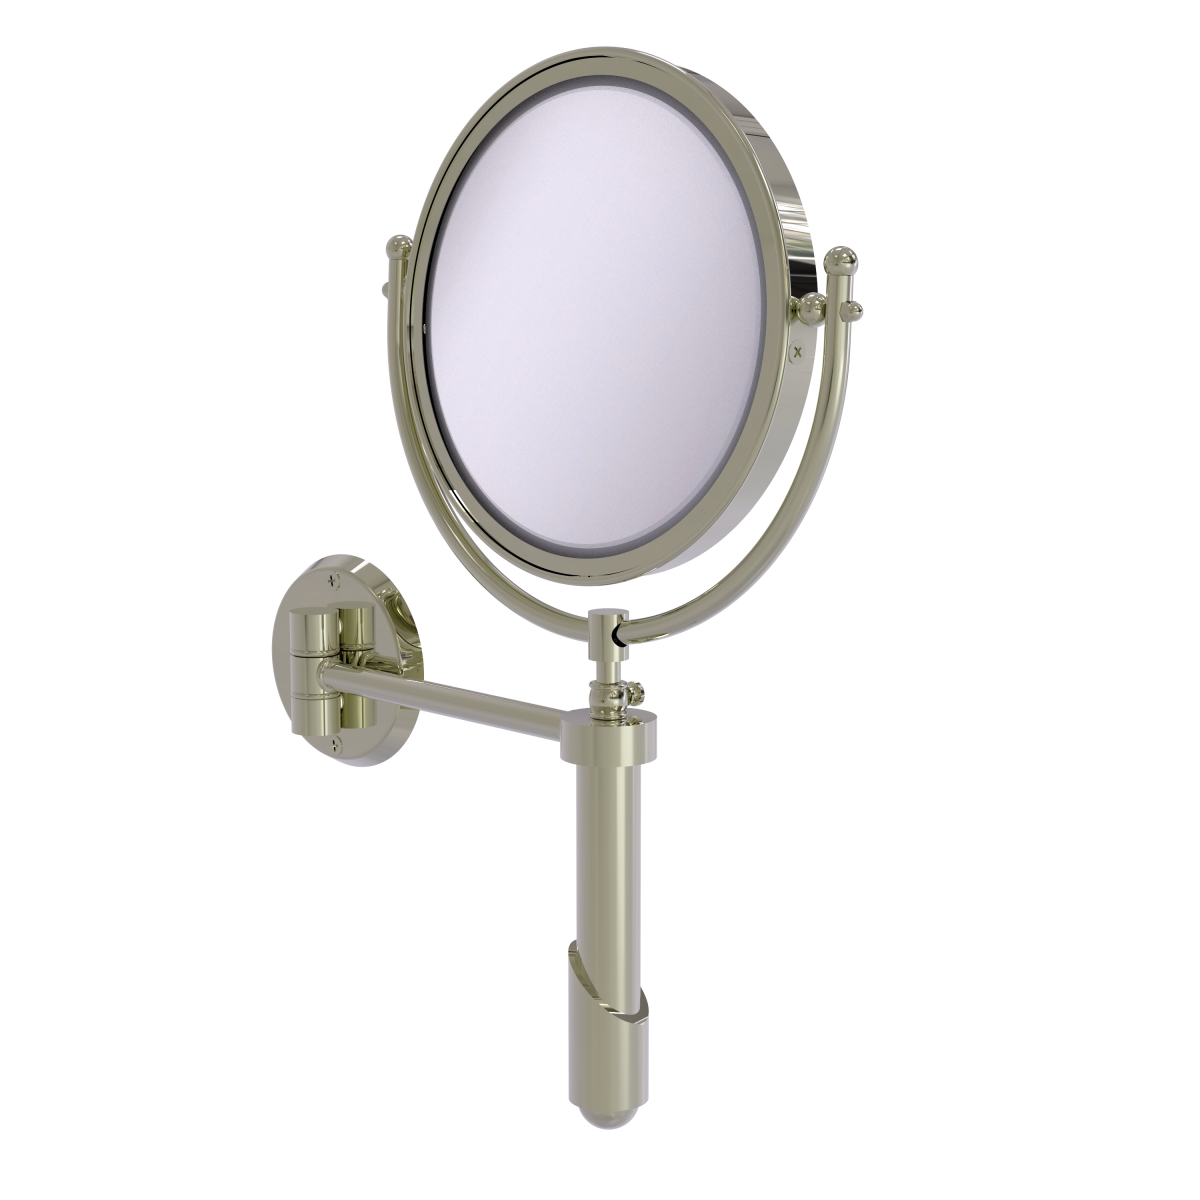 SHM-8-2X-PNI 8 in. dia. Soho Collection Wall Mounted Make-Up Mirror with 2X Magnification, Polished Nickel -  Allied Brass, SHM-8/2X-PNI